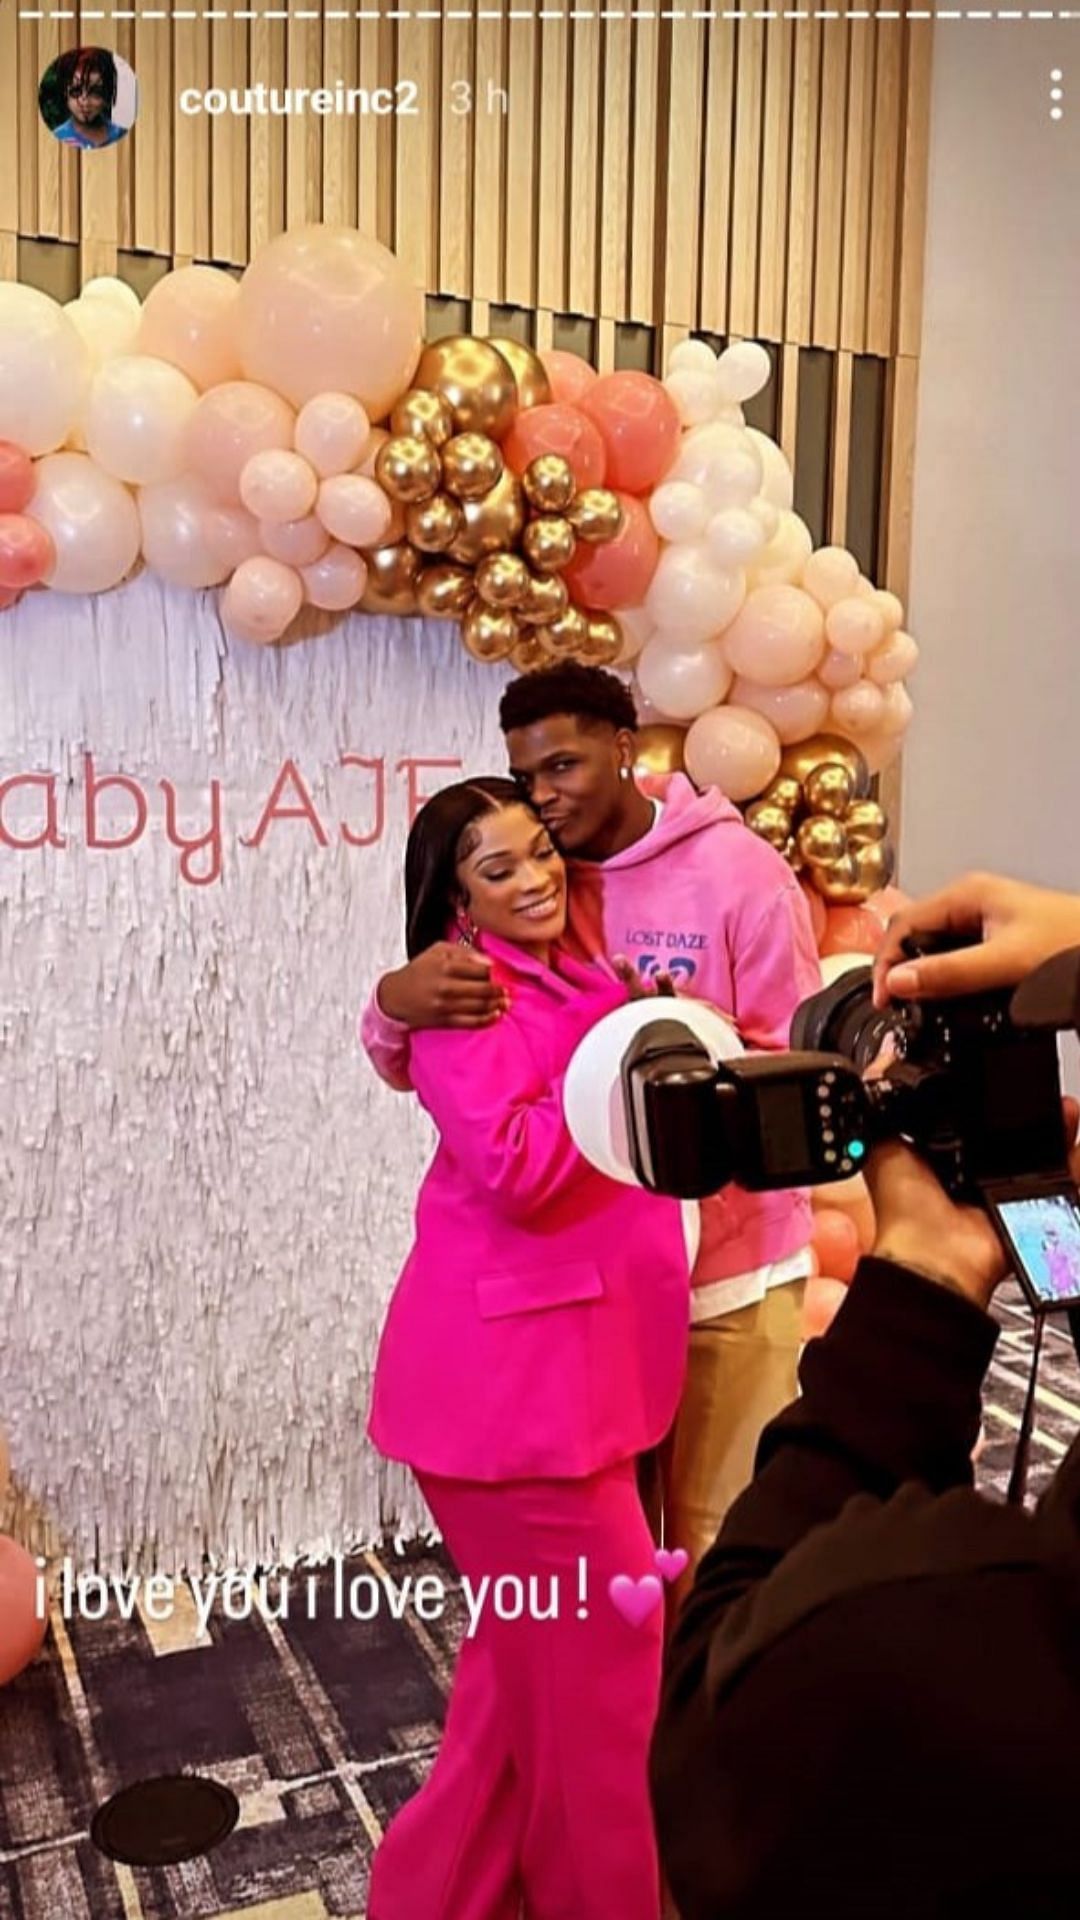 Edwards and Baby Mama&#039;s pose for a photo at the baby shower